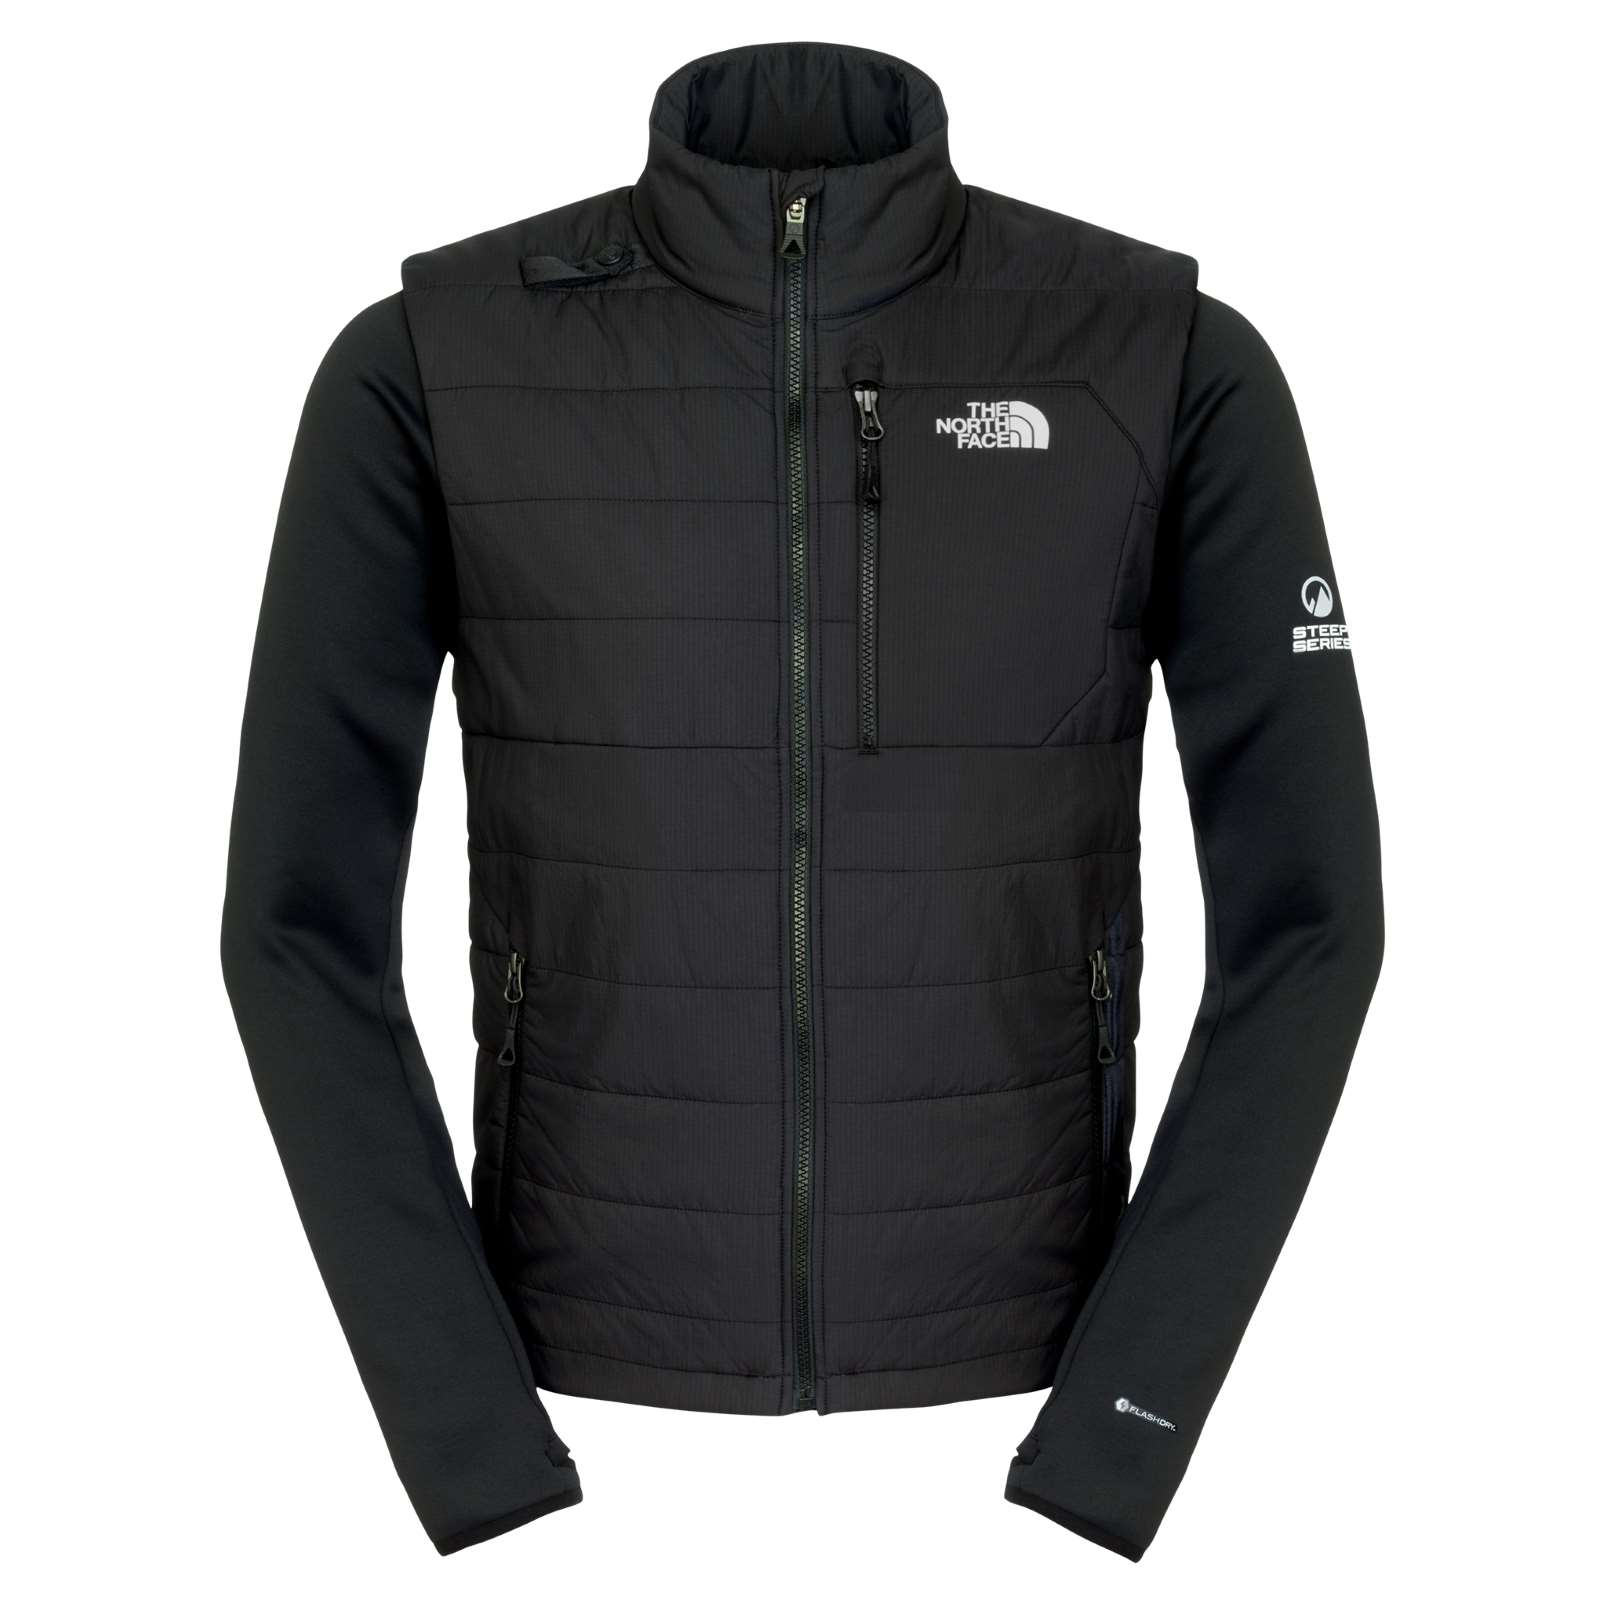 Pemby Hybrid Jacket from Outnorth